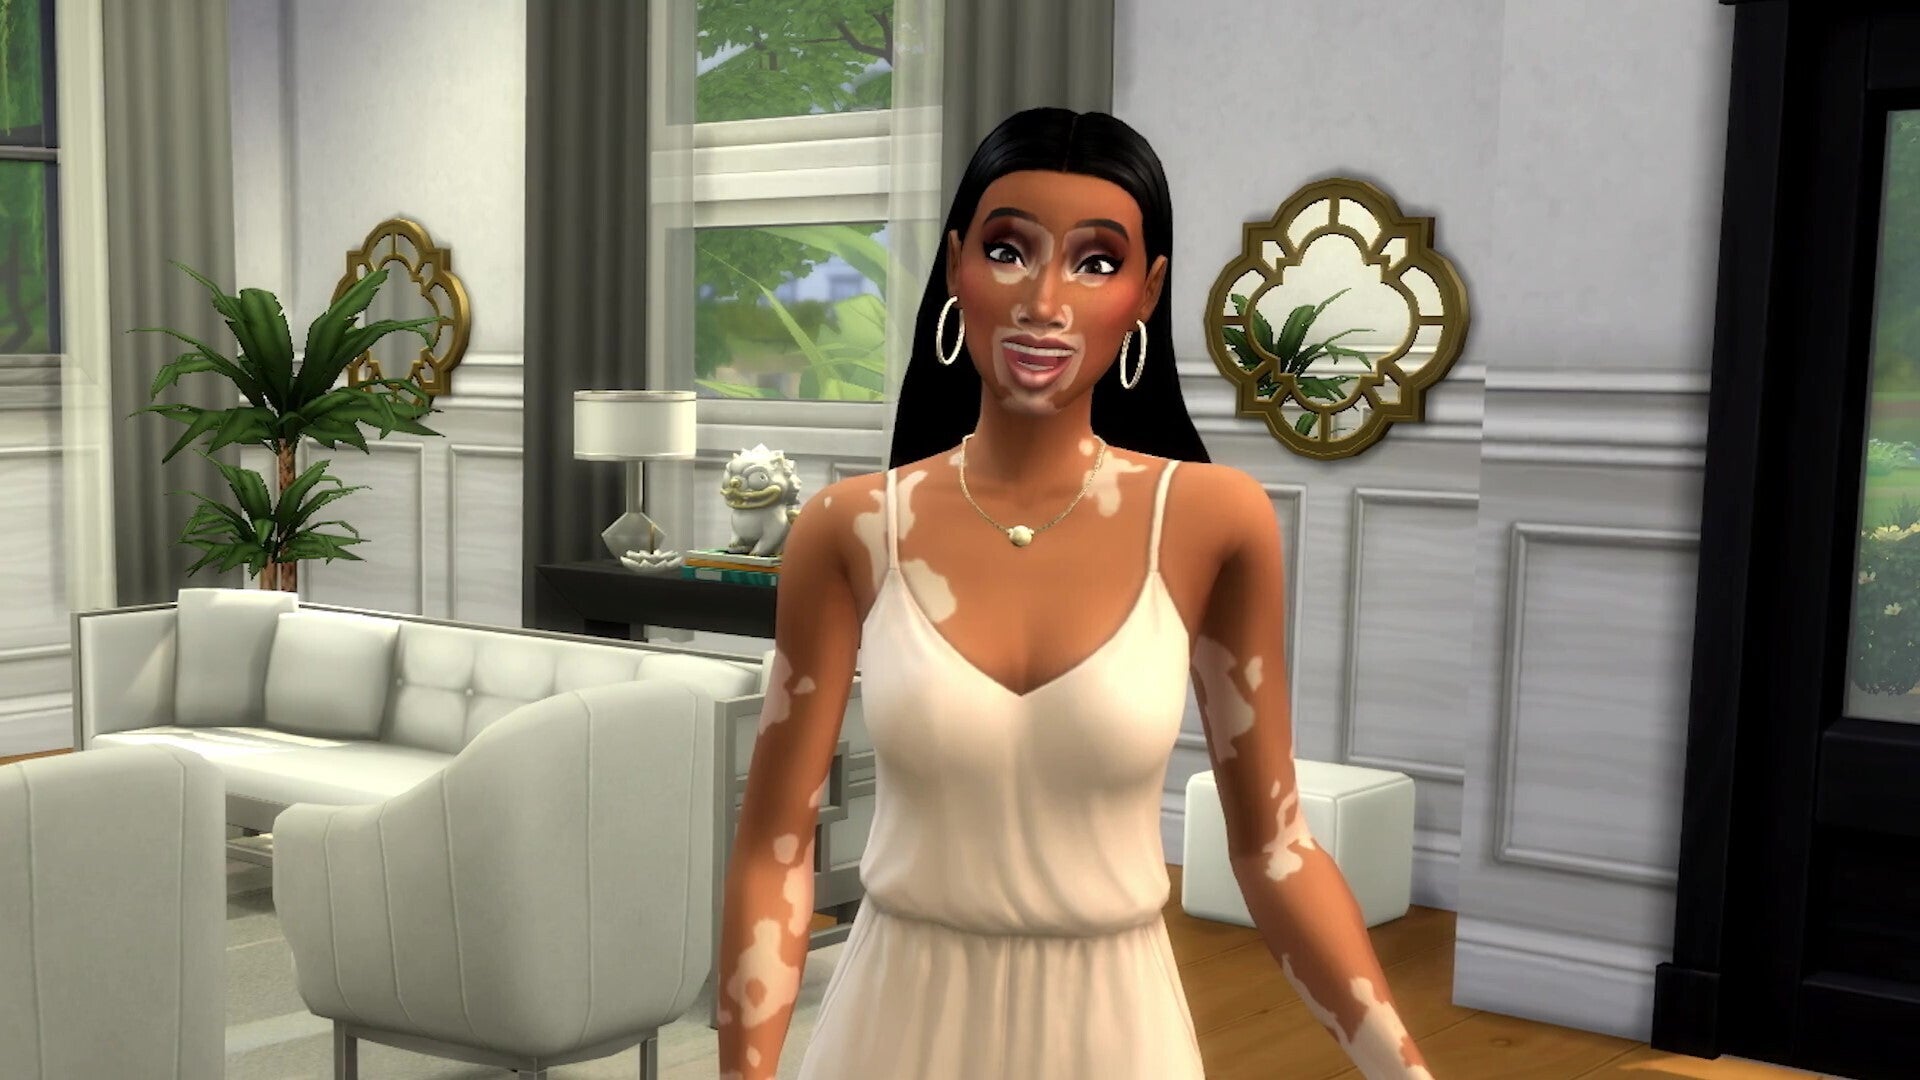 A Vitiligo Skin Feature Is Coming To The Latest 'Sims' Game With Help From Winnie Harlow